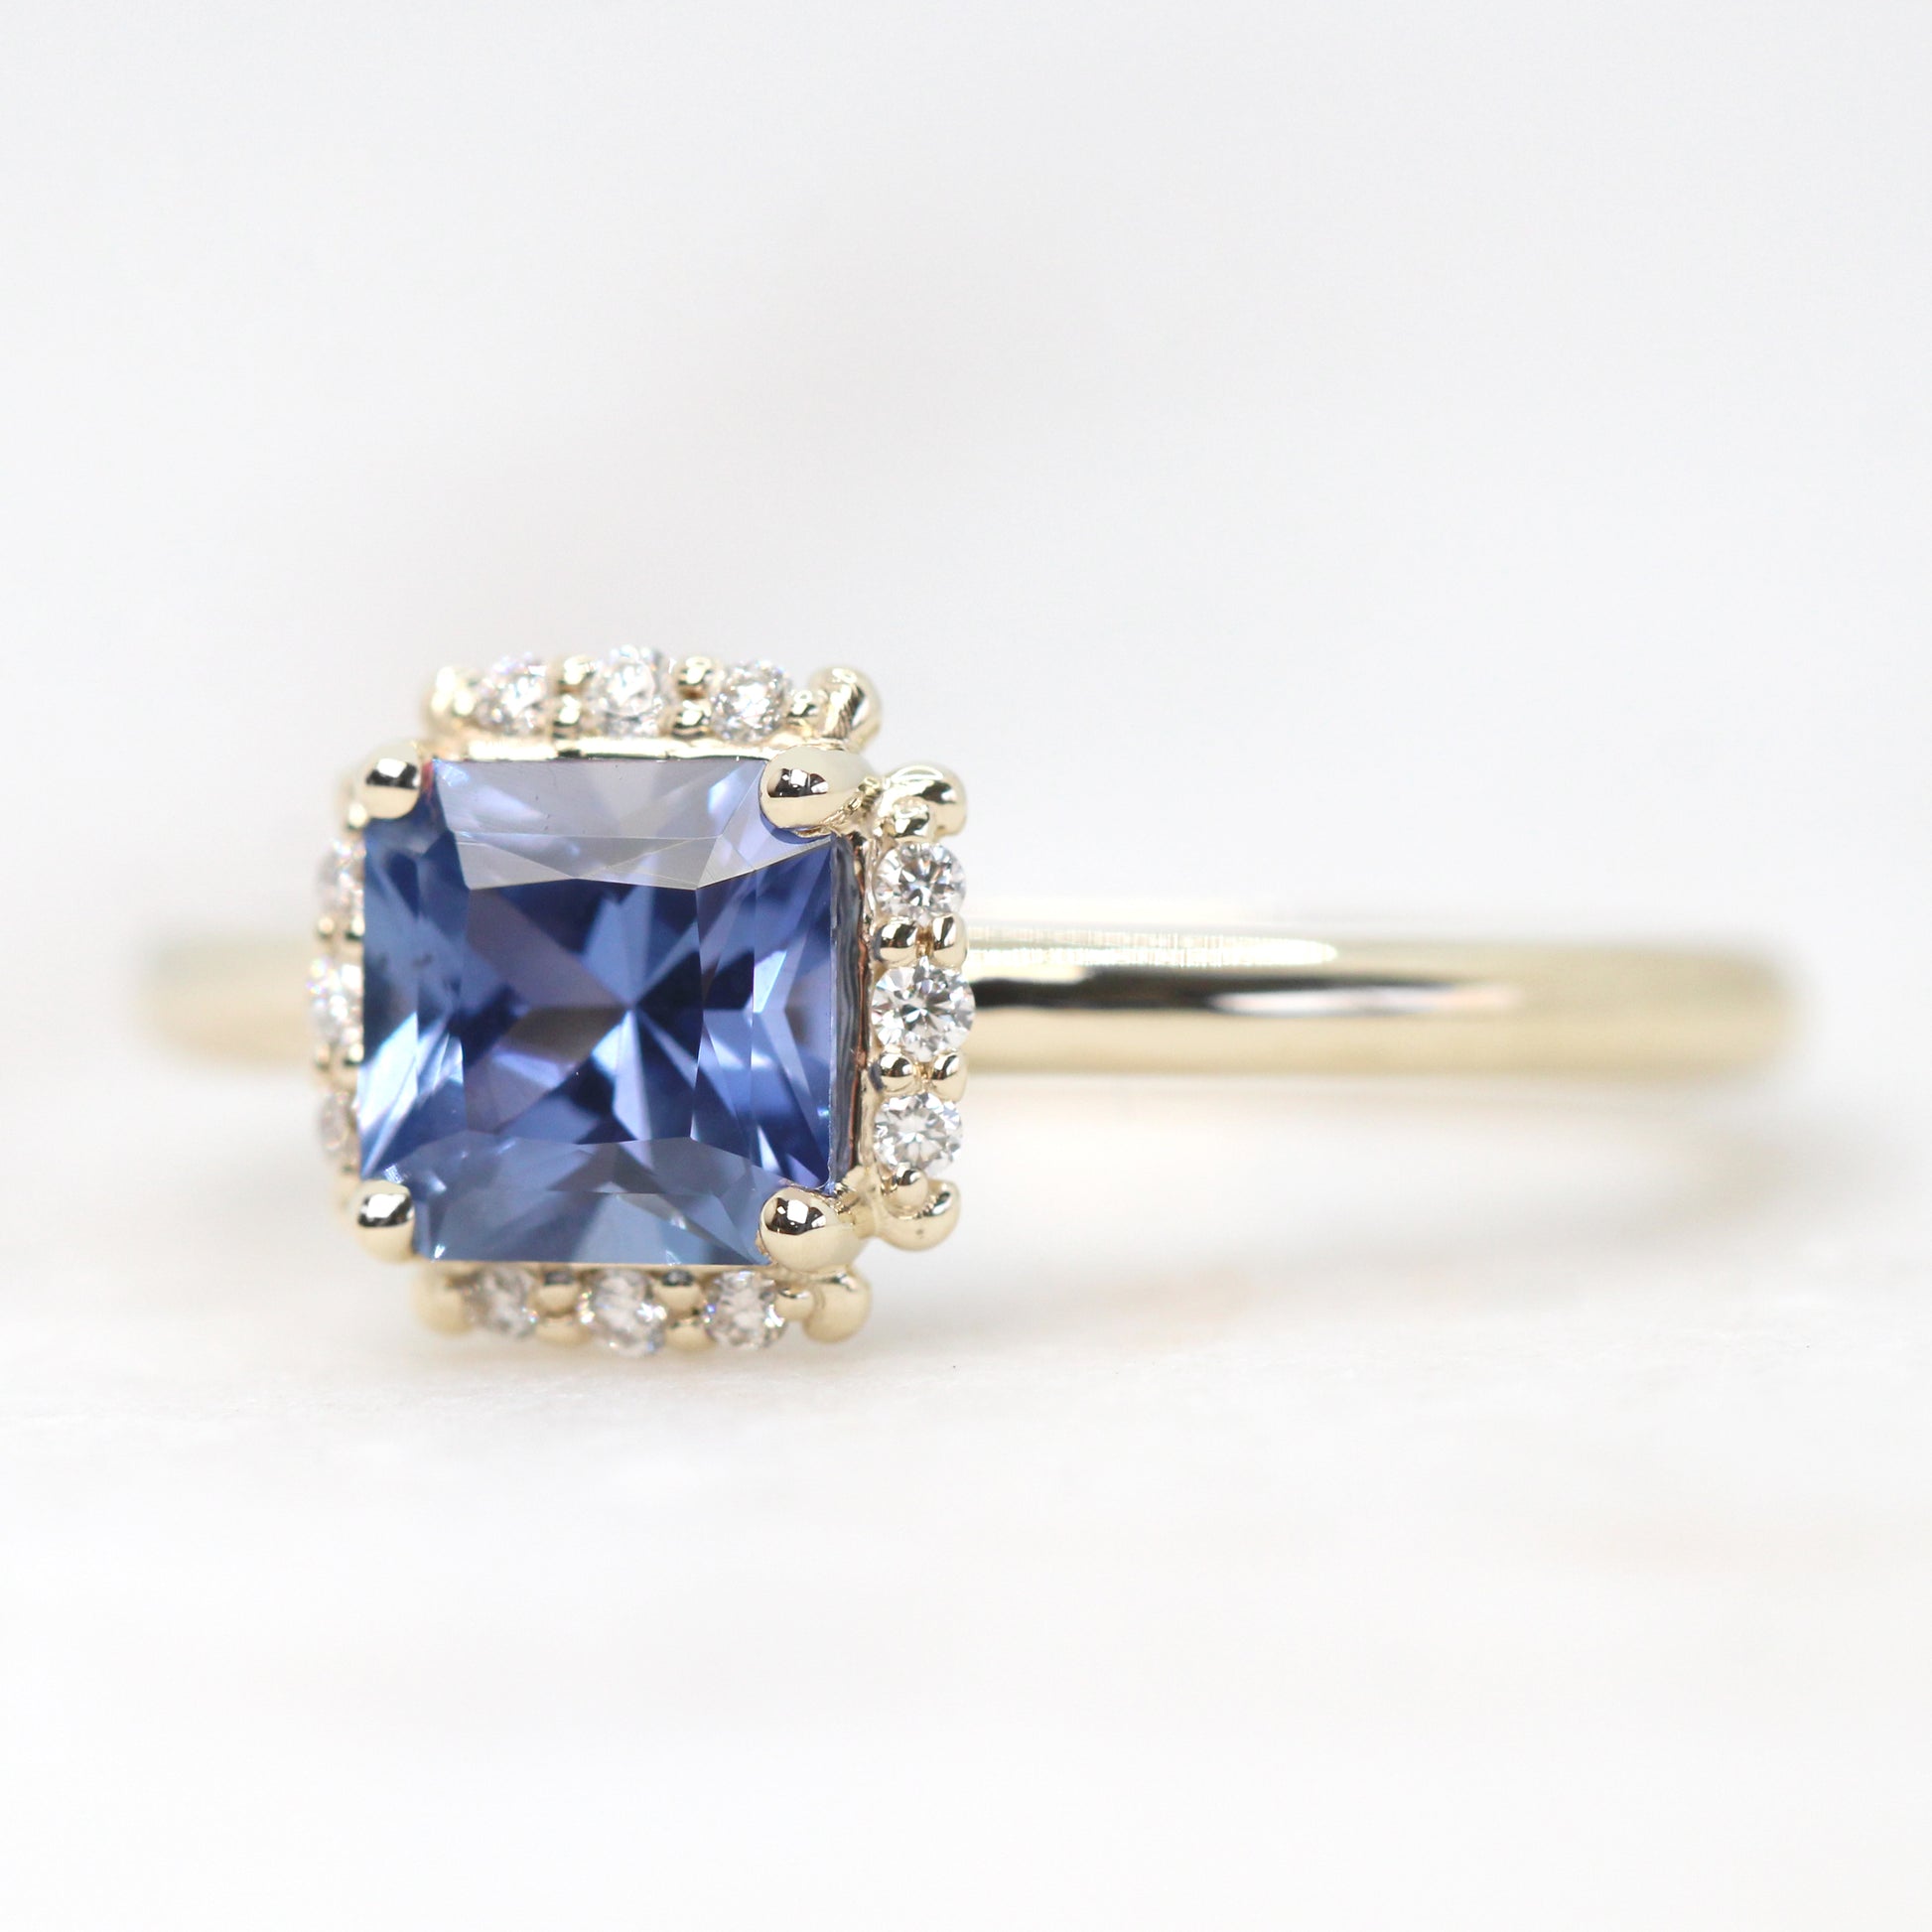 Astrid Ring with a 1.08 Carat Radiant Cut Blue Sapphire and White Accent Diamonds in 10k Yellow Gold - Ready to Size and Ship - Midwinter Co. Alternative Bridal Rings and Modern Fine Jewelry